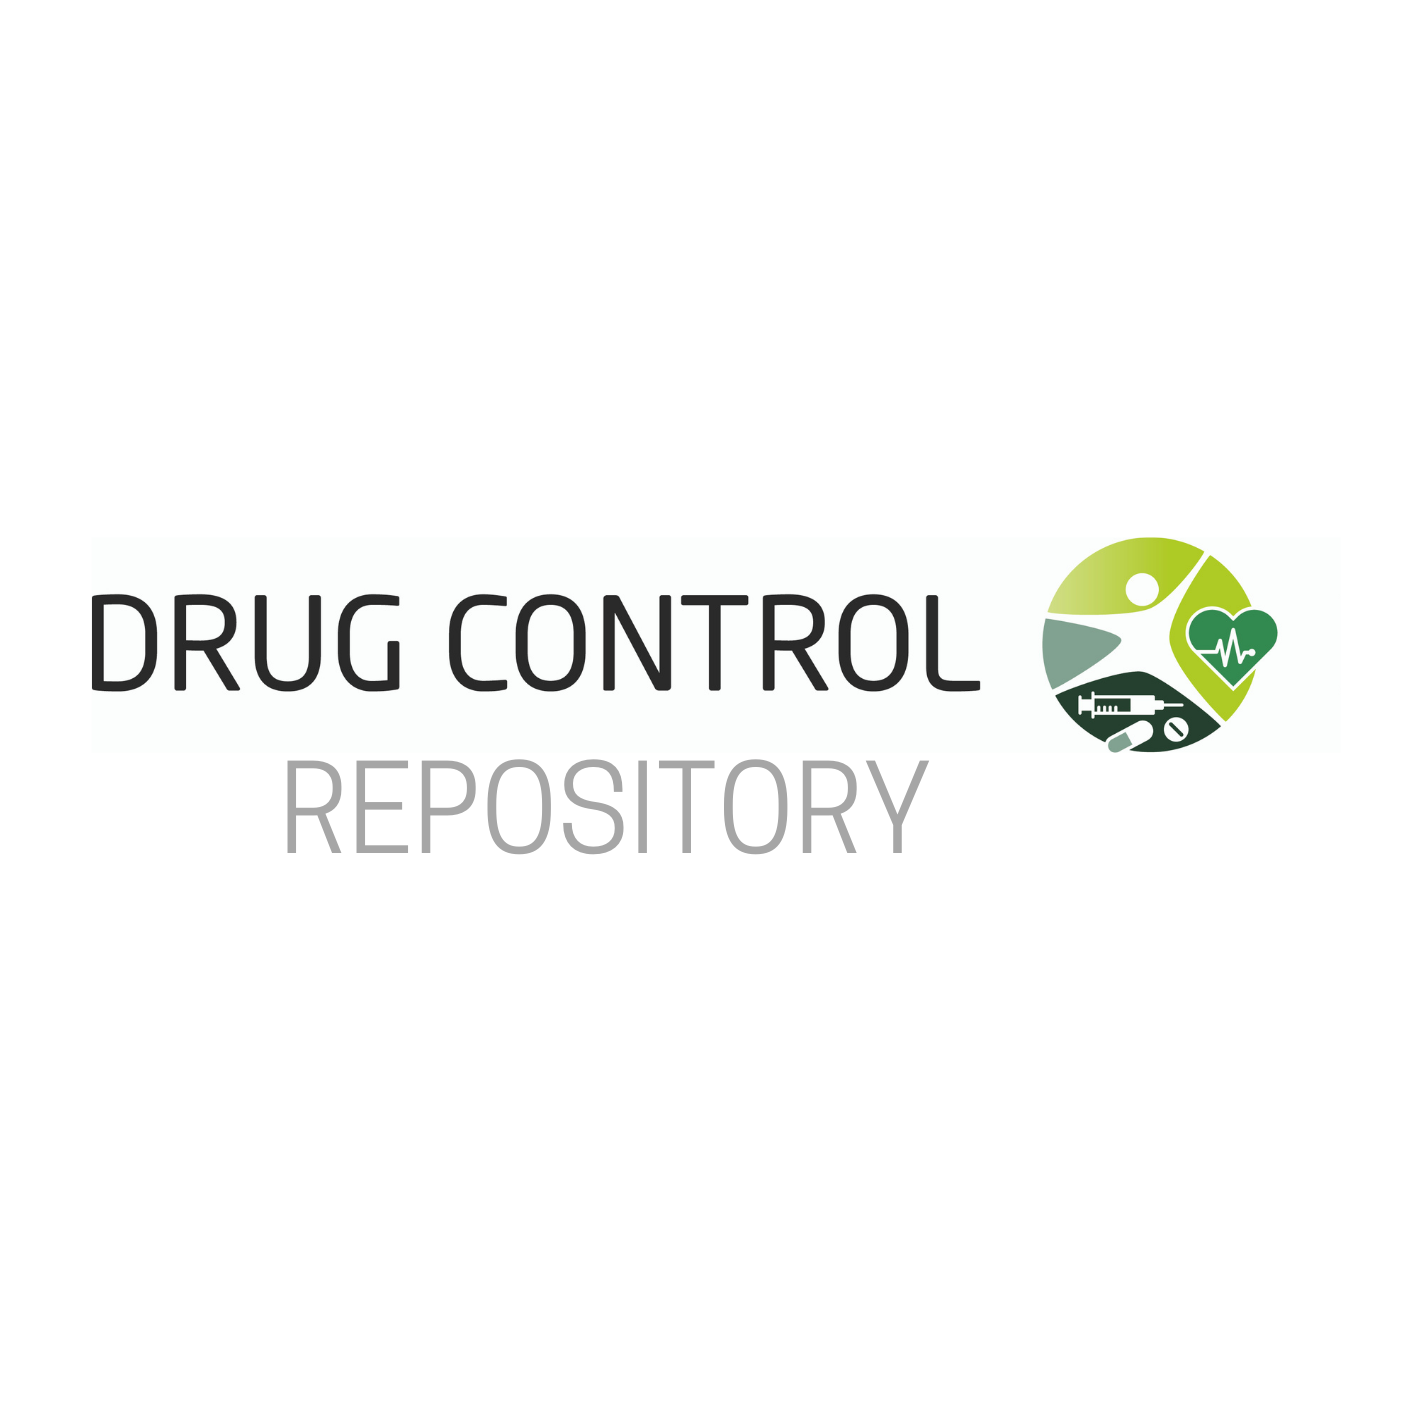 Logo of the Drug Control Repository 